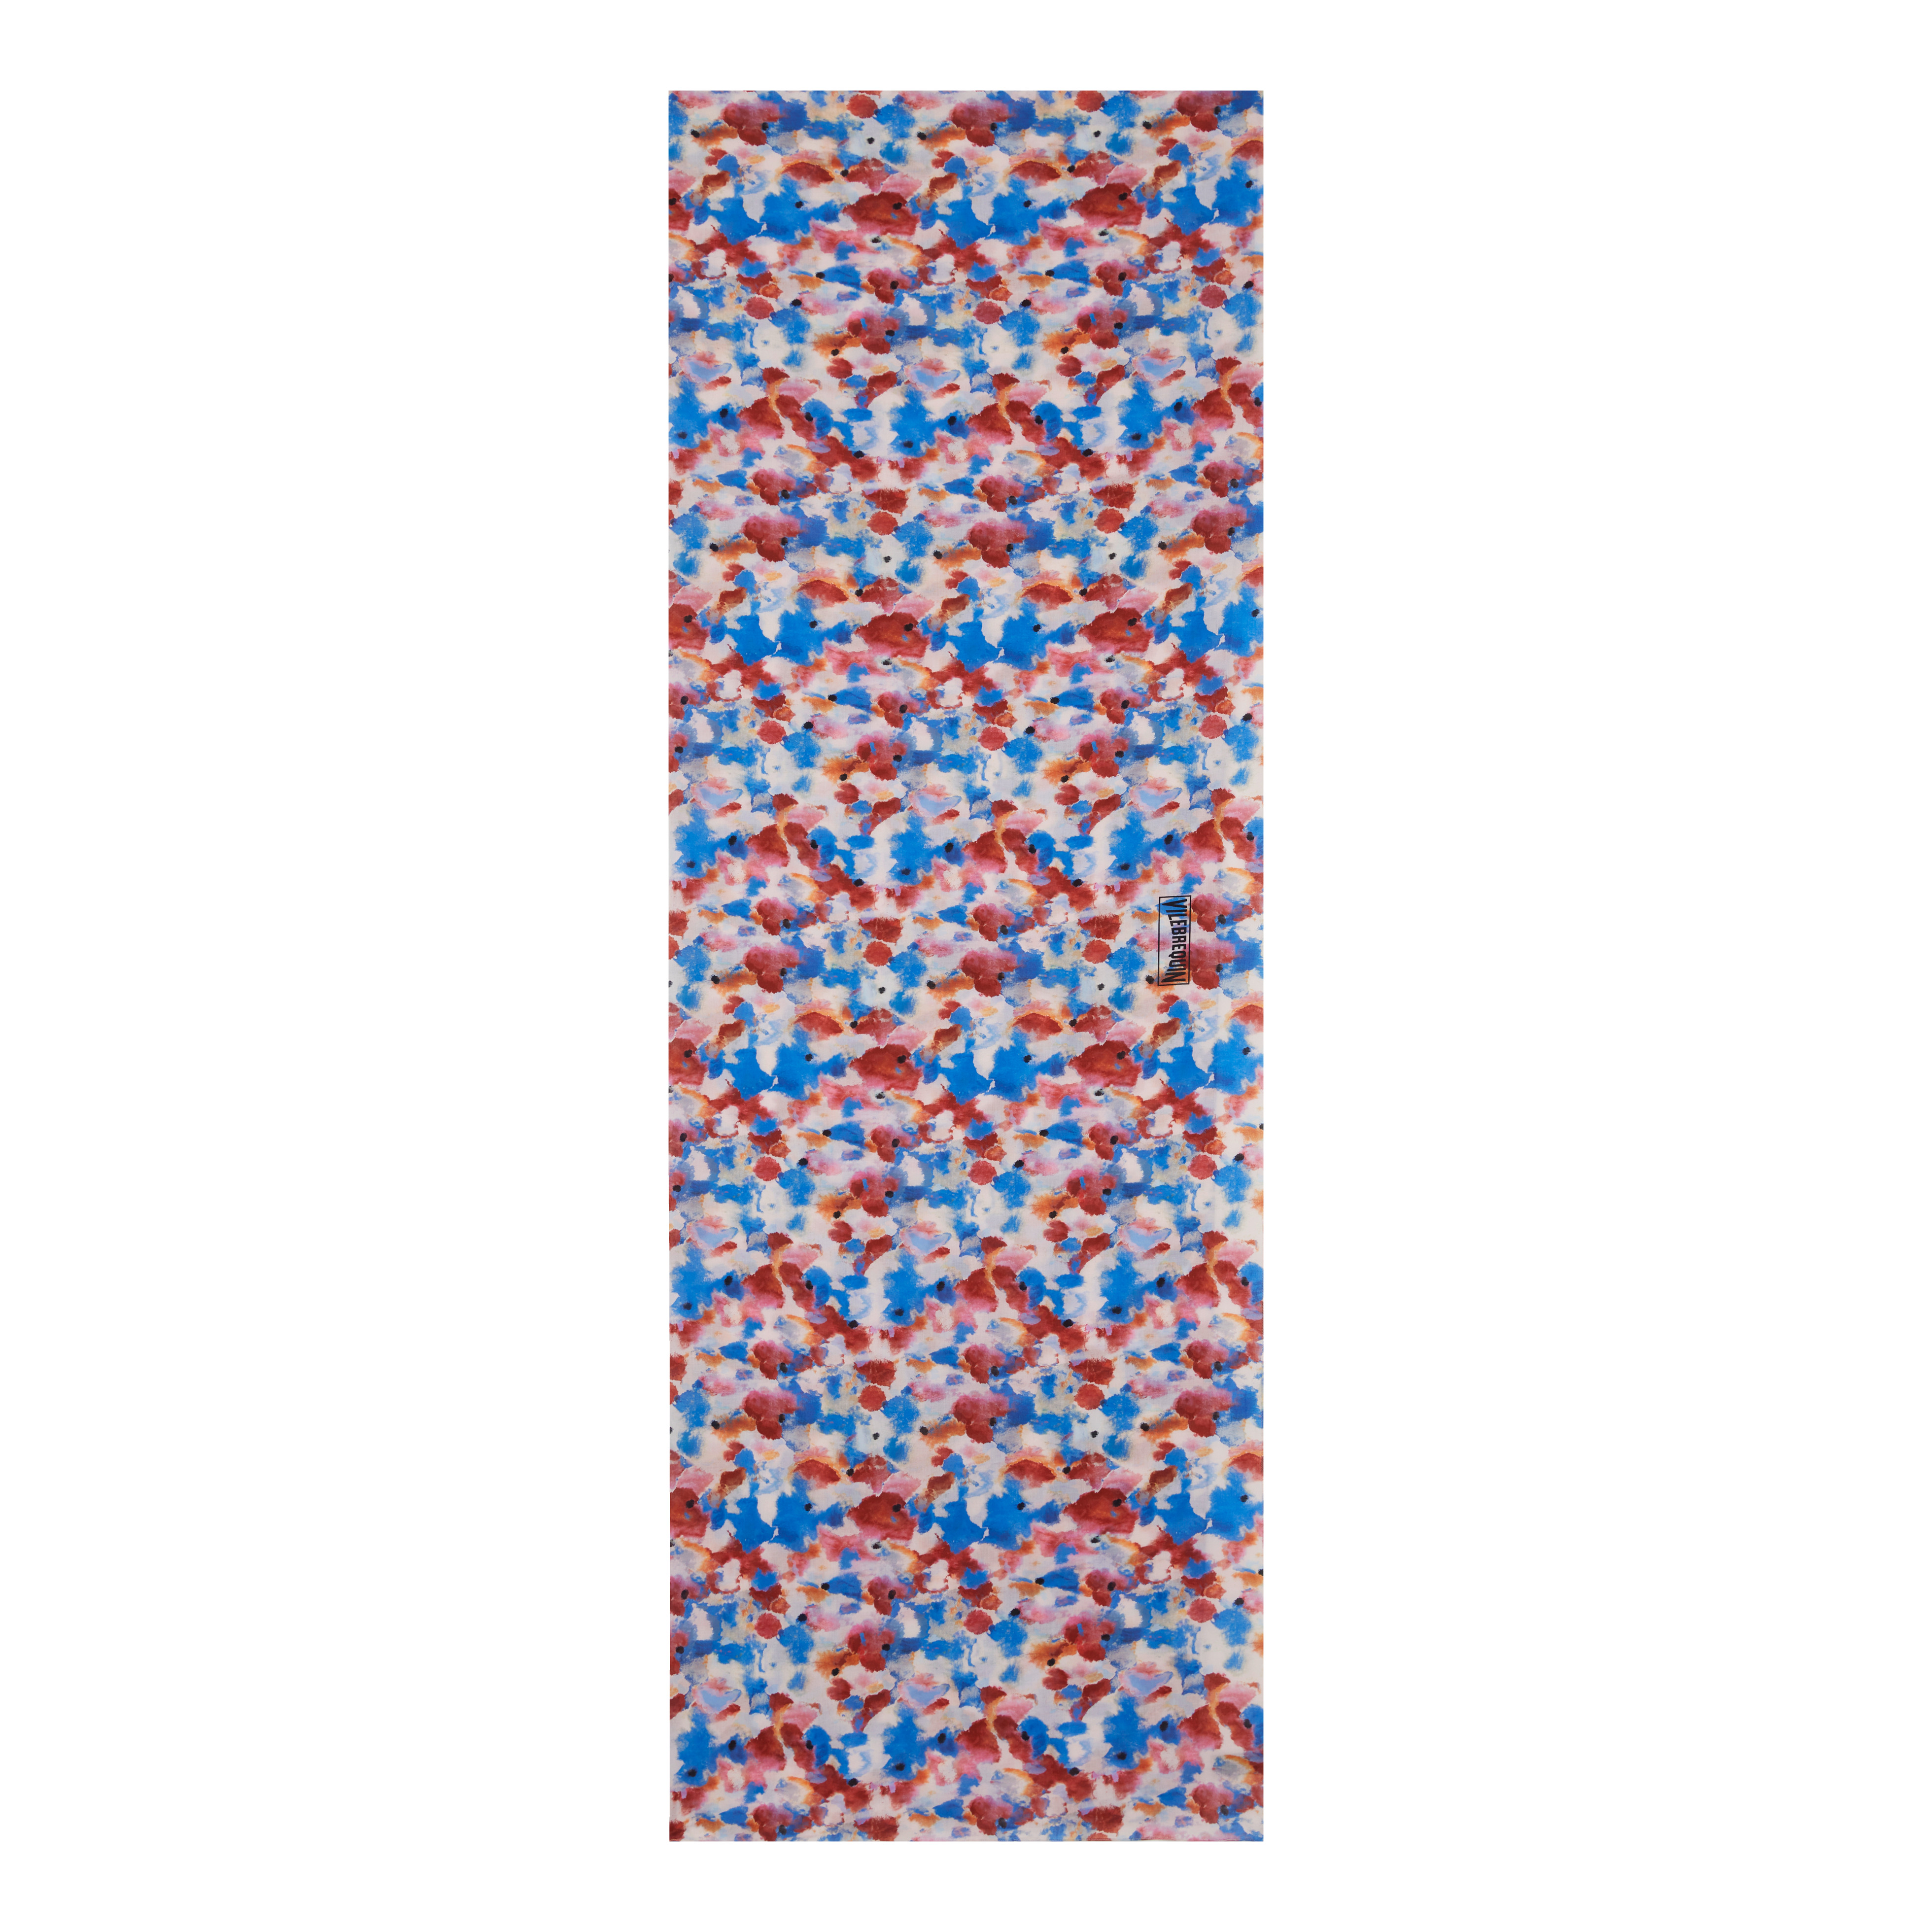 Unisex Cotton Voile Pareo Flowers in the Sky - 1